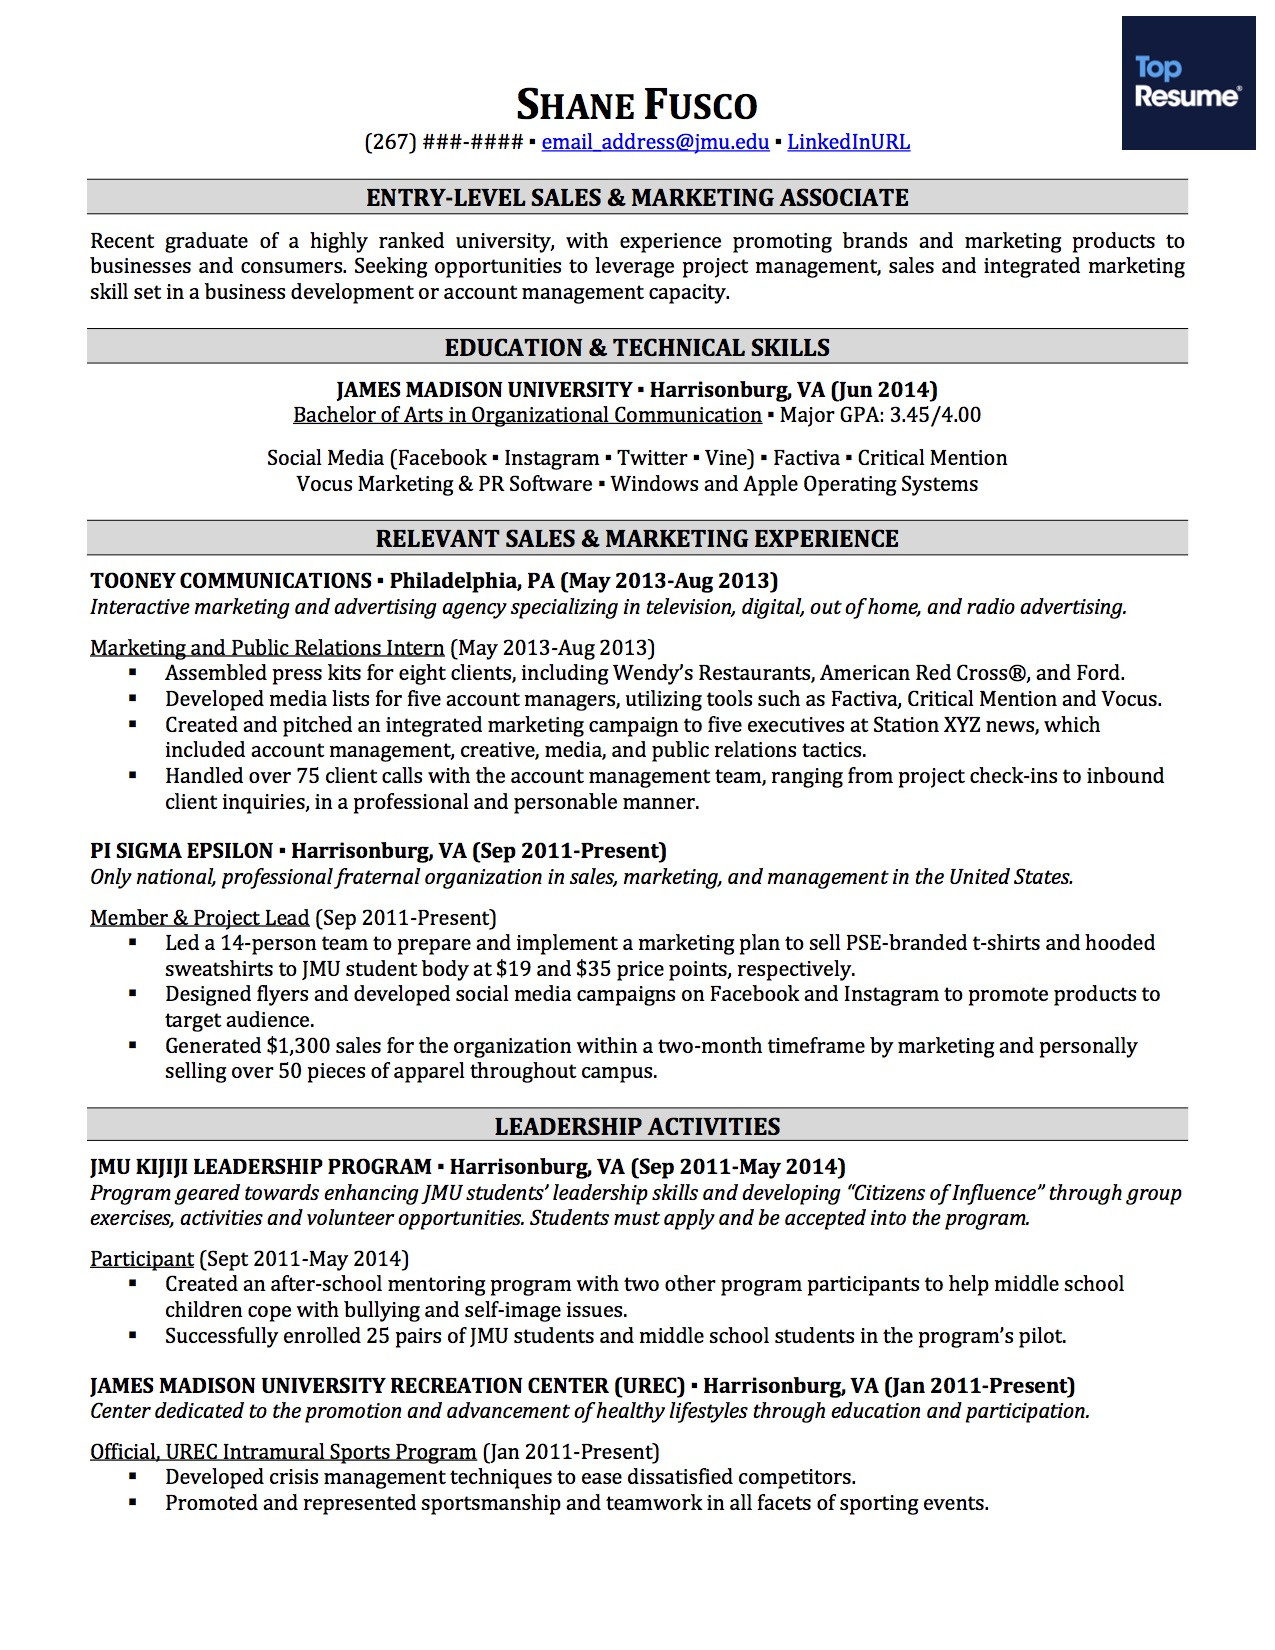 Sample Resume with Only One Job Experience How to Write A Resume with No Experience topresume